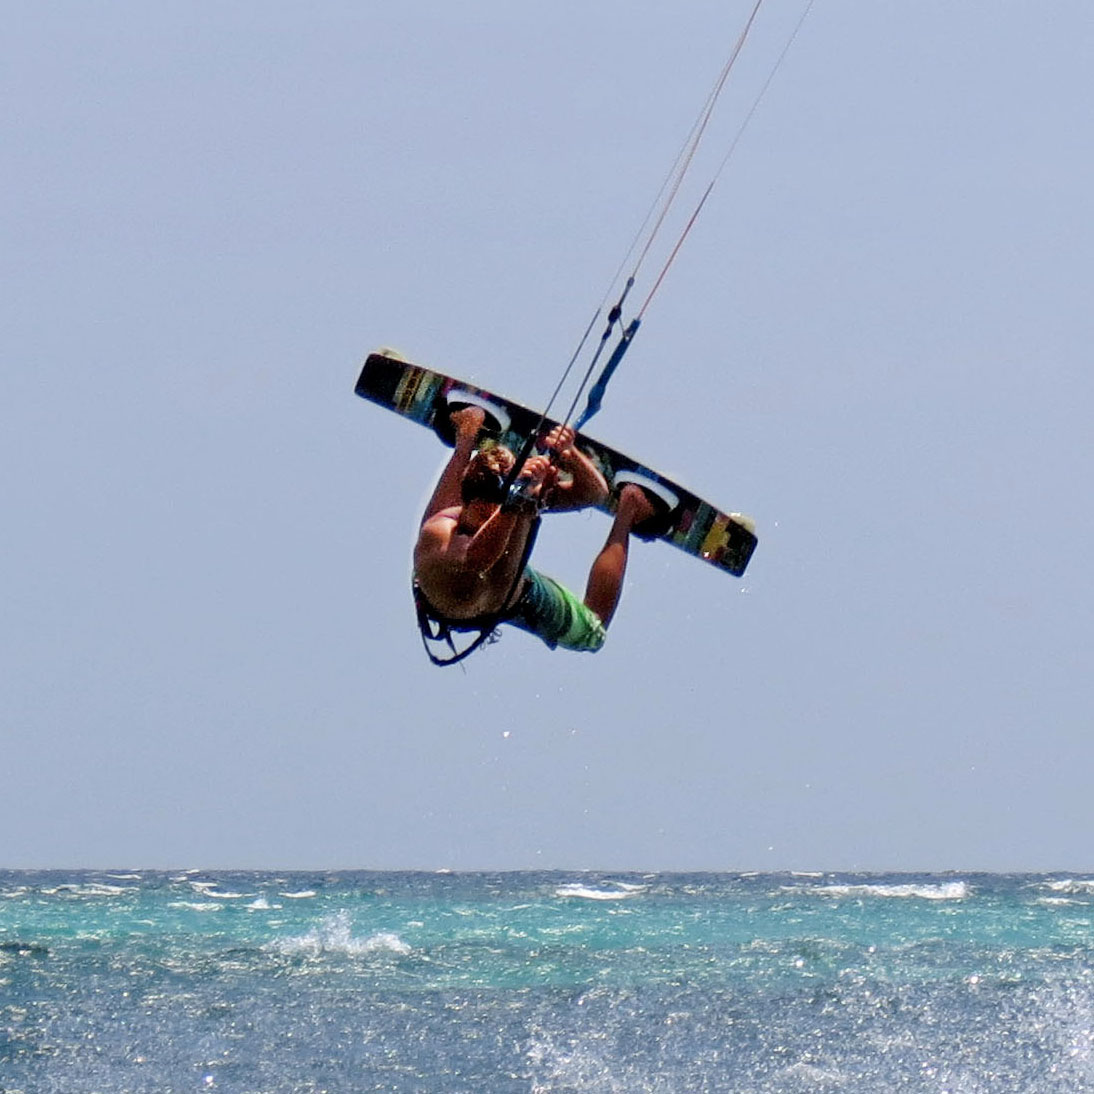 Kiteinstructor Martin was joining the team from Funboard Center Boracay in 2013/14.